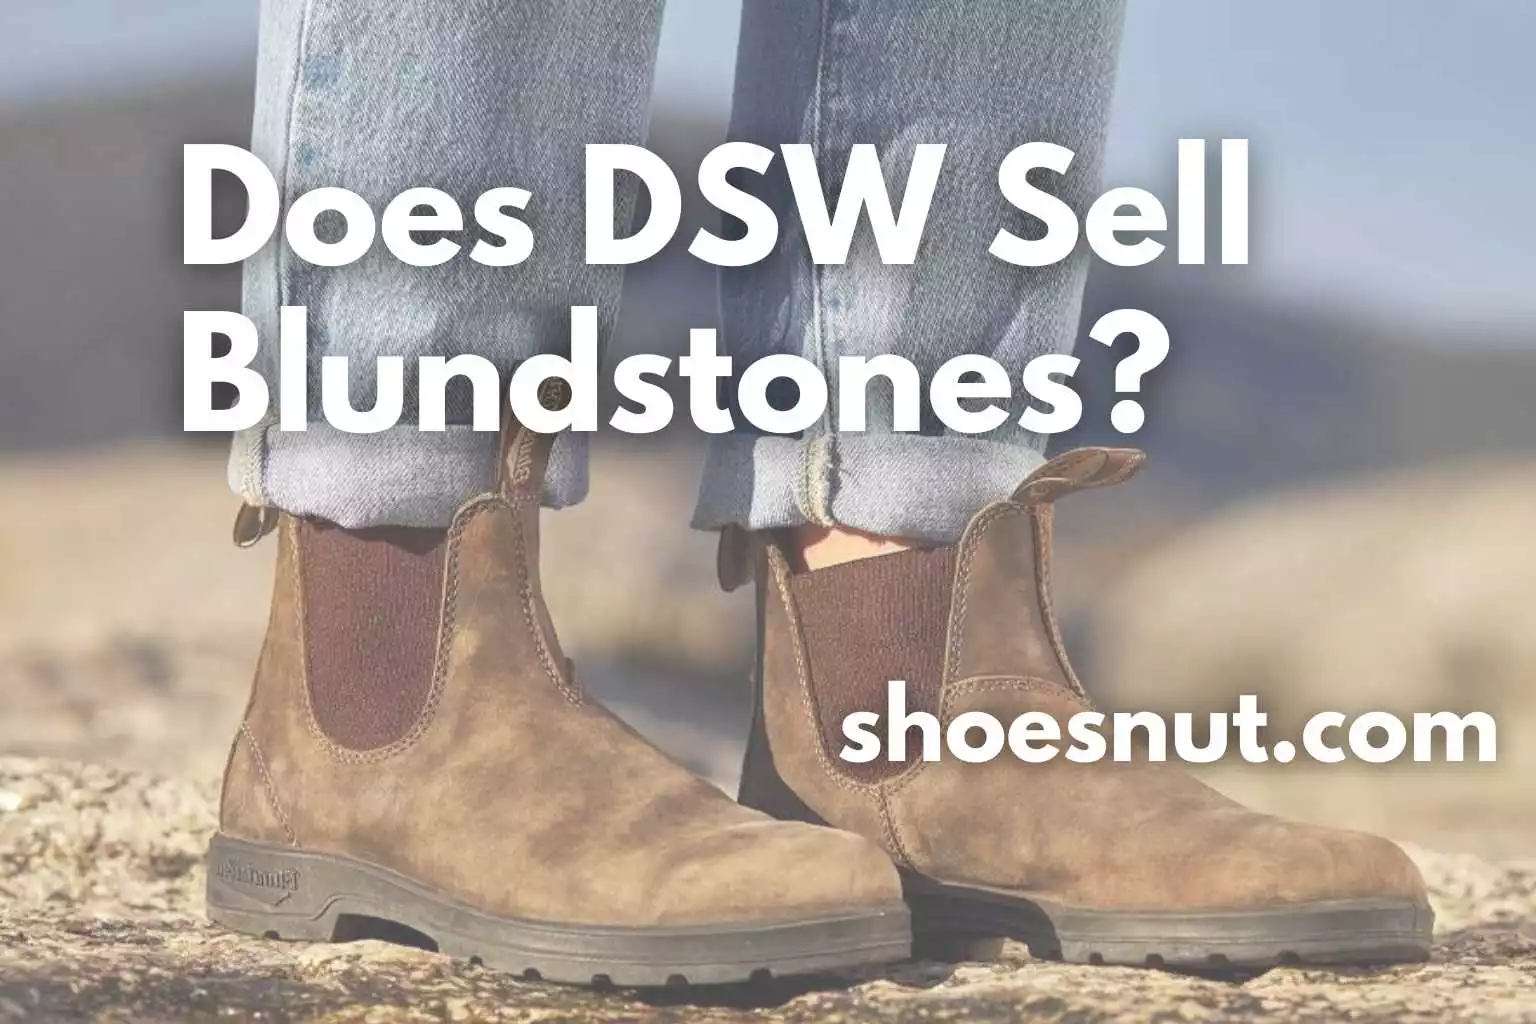 Does DSW Sell Blundstones?